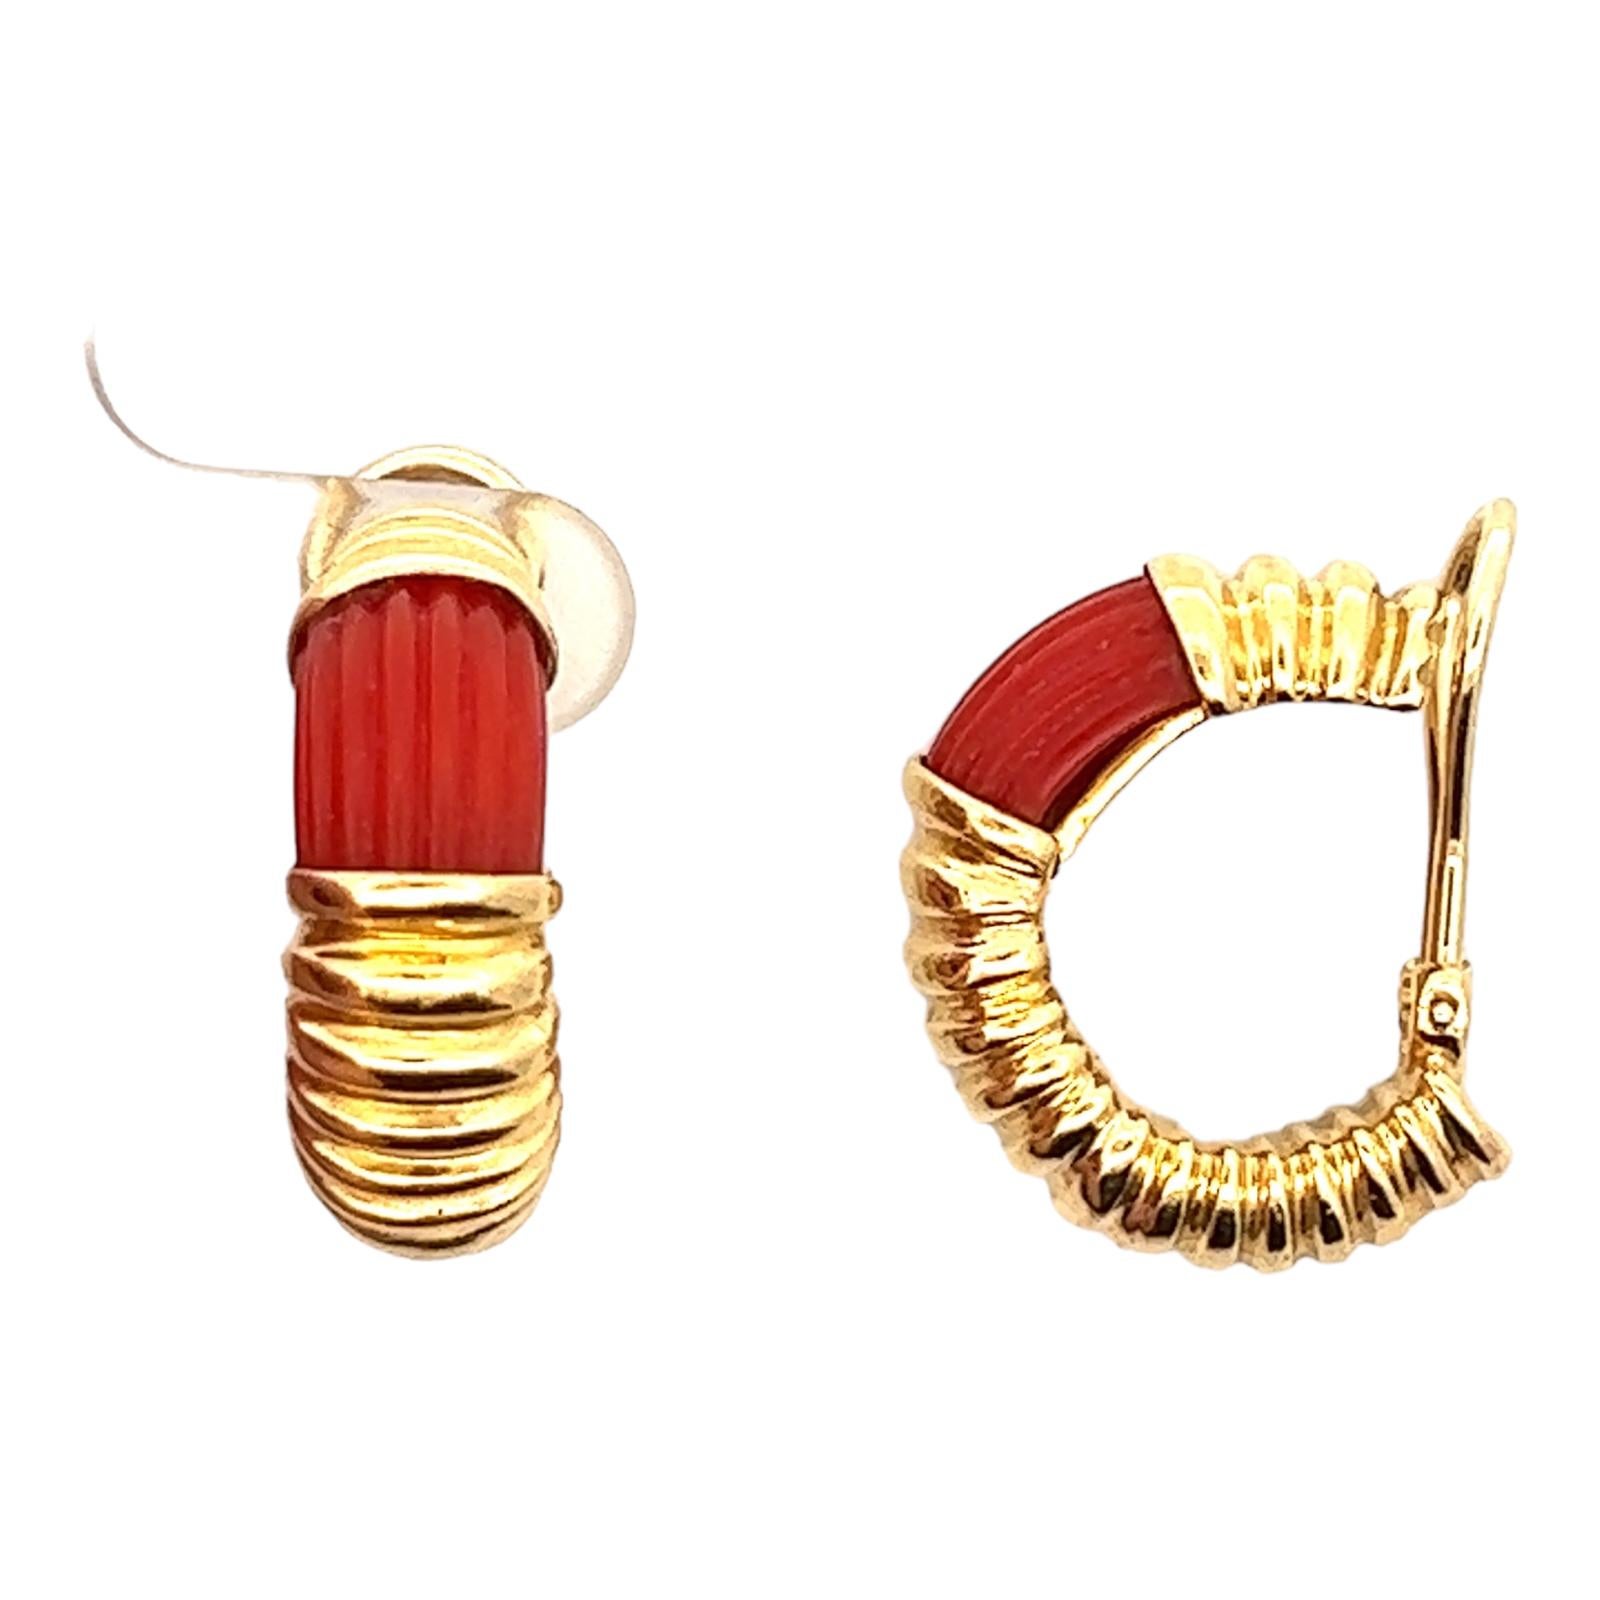 Vintage carnelian gemstone half hoop earrings are fashioned in 18 karat yellow gold. The earrings feature ribbed carnelian gemstone and ribbed gold. The earrings measure 24 mm in length and 8mm in width. Lever-back clip backs (posts can be added). 